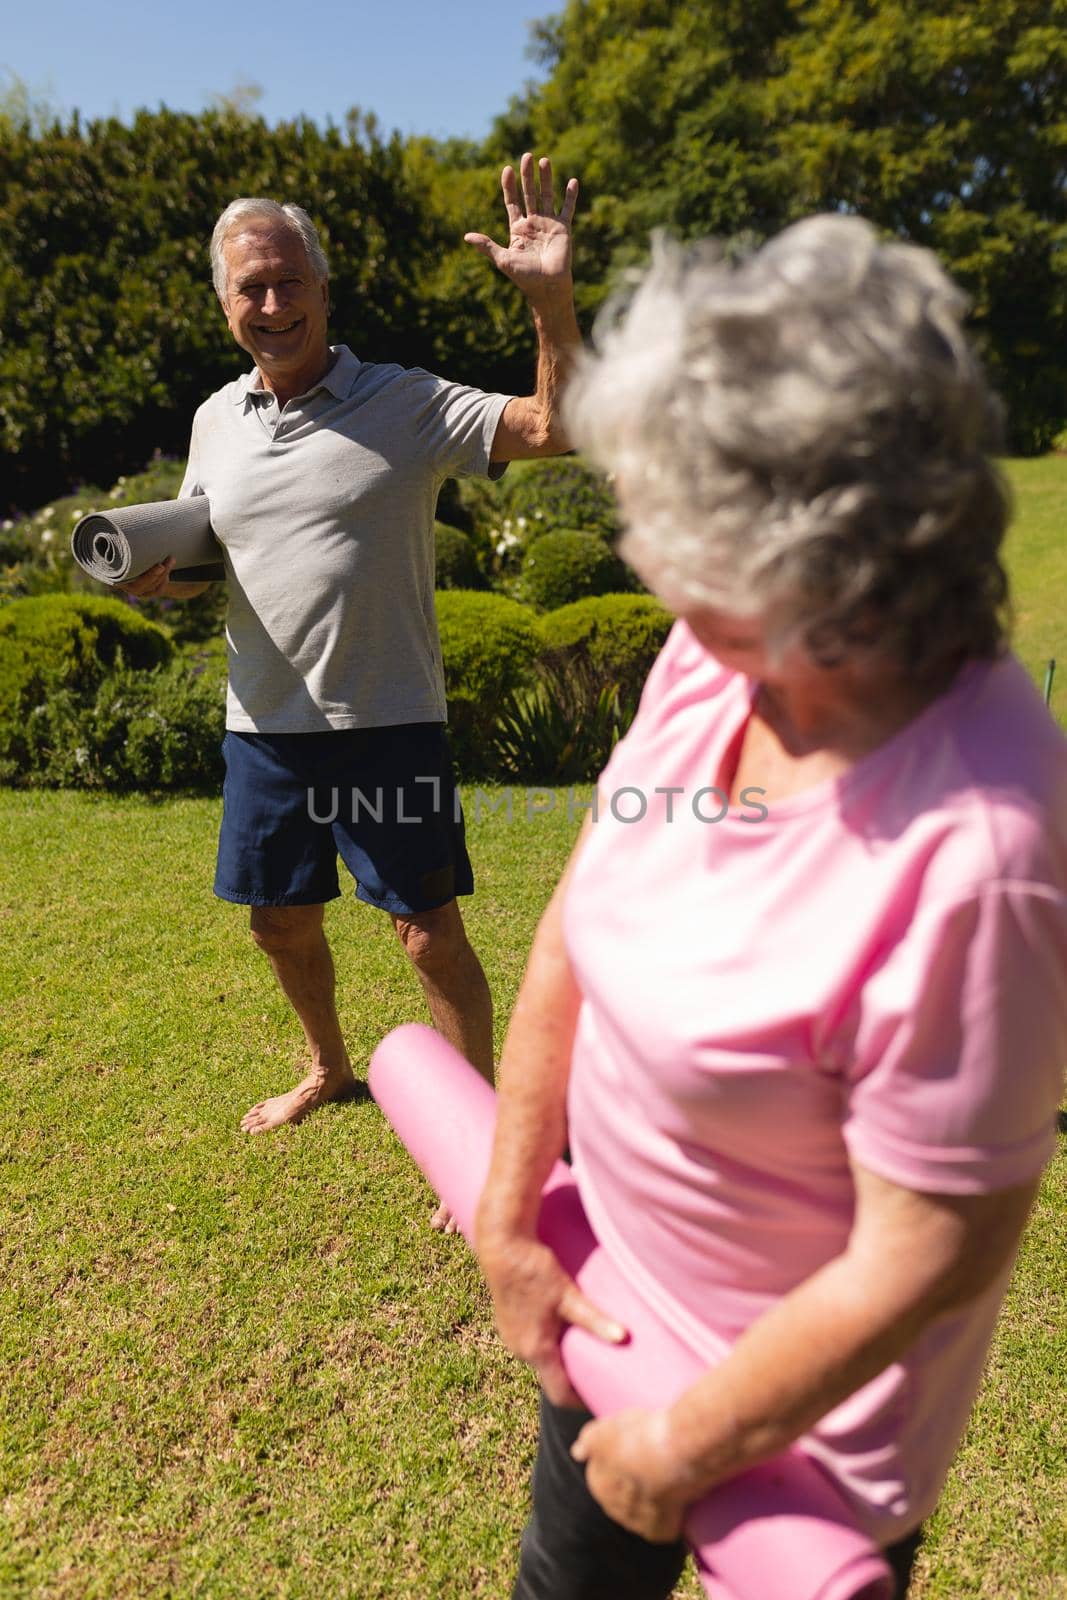 Portrait of senior caucasian couple holding yoga mats, looking at camera and smiling in sunny garden by Wavebreakmedia